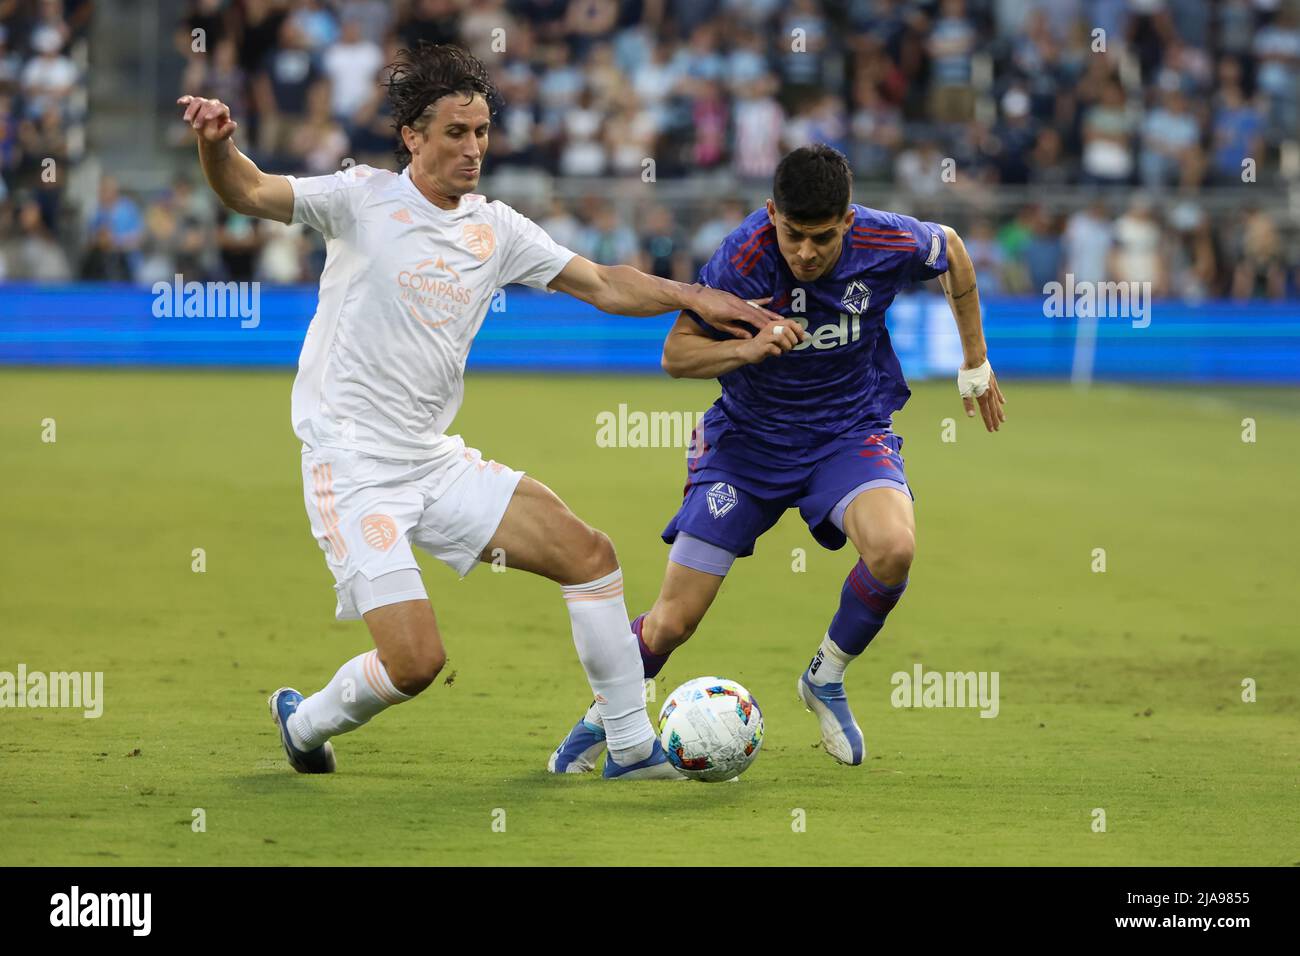 KANSAS Kansas City, KS - MAY 28: Sporting Kansas City defender Ben Sweat (2) tries to steal the ball from Vancouver Whitecaps defender CristiÃ¡n GutiÃ©rrez (3) in the first half of an MLS match between the Vancouver Whitecaps and Sporting KC on May 28, 2022 at Childrenâ€™s Mercy Park in Kansas City, KS. (Credit Image: © Scott Winters/Icon SMI via ZUMA Press) Stock Photo